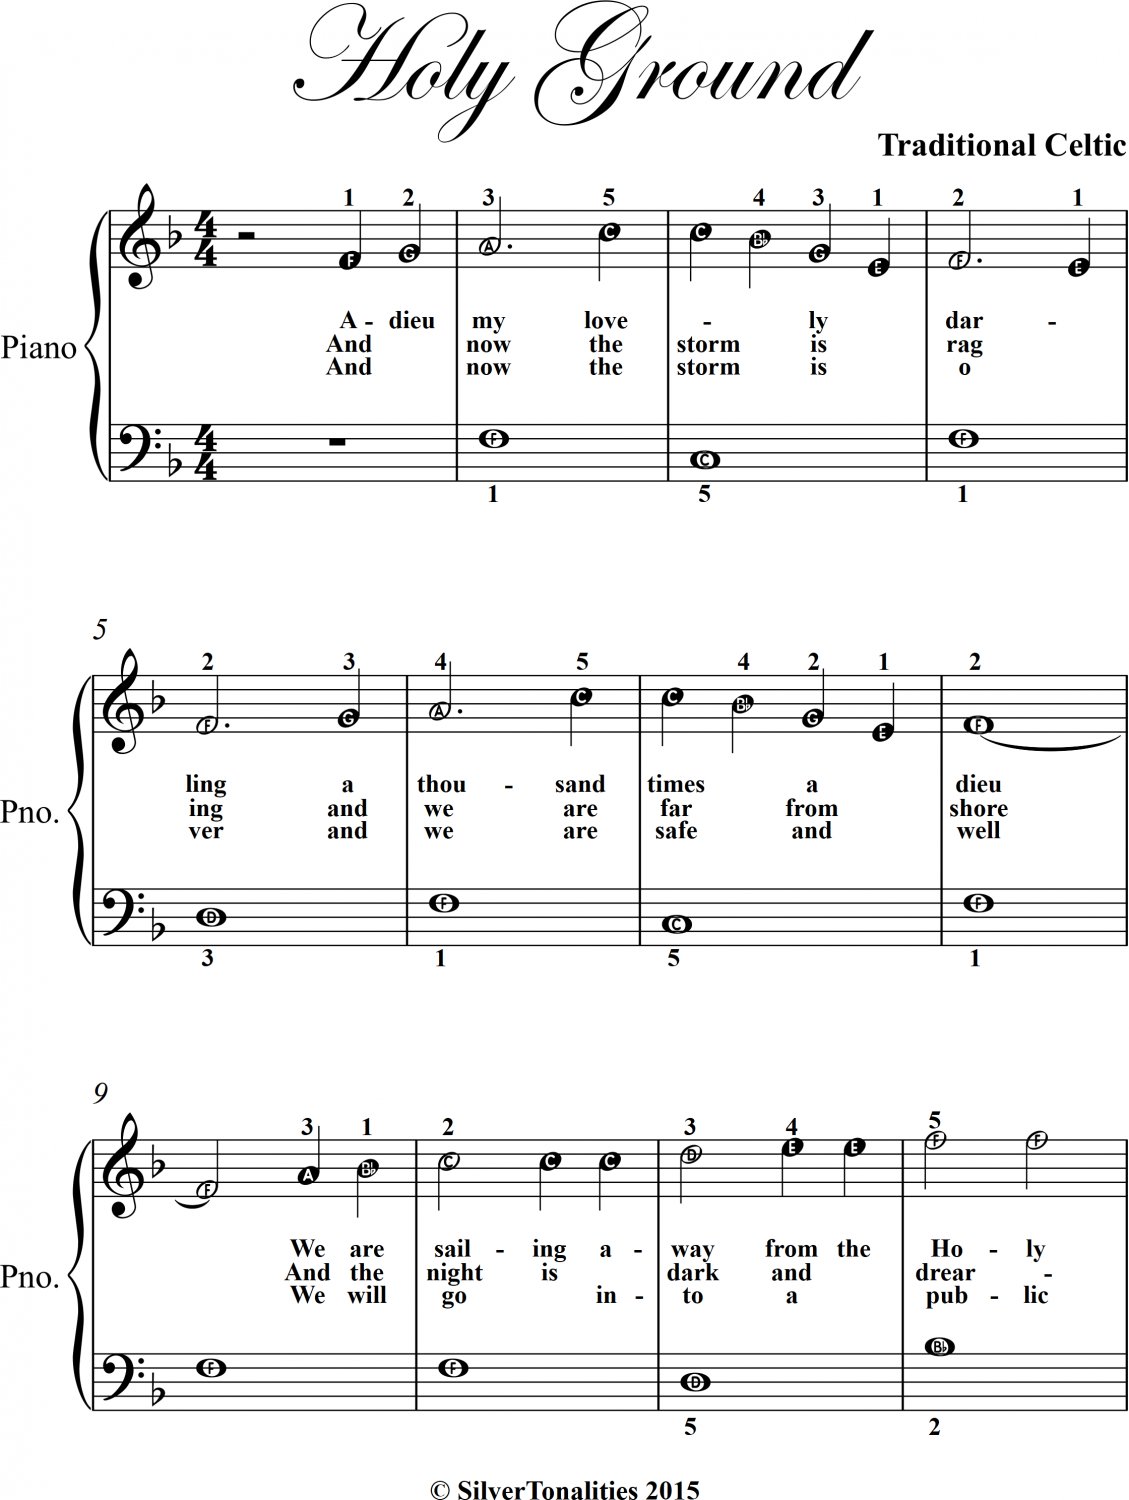 Holy Ground Easiest Piano Sheet Music